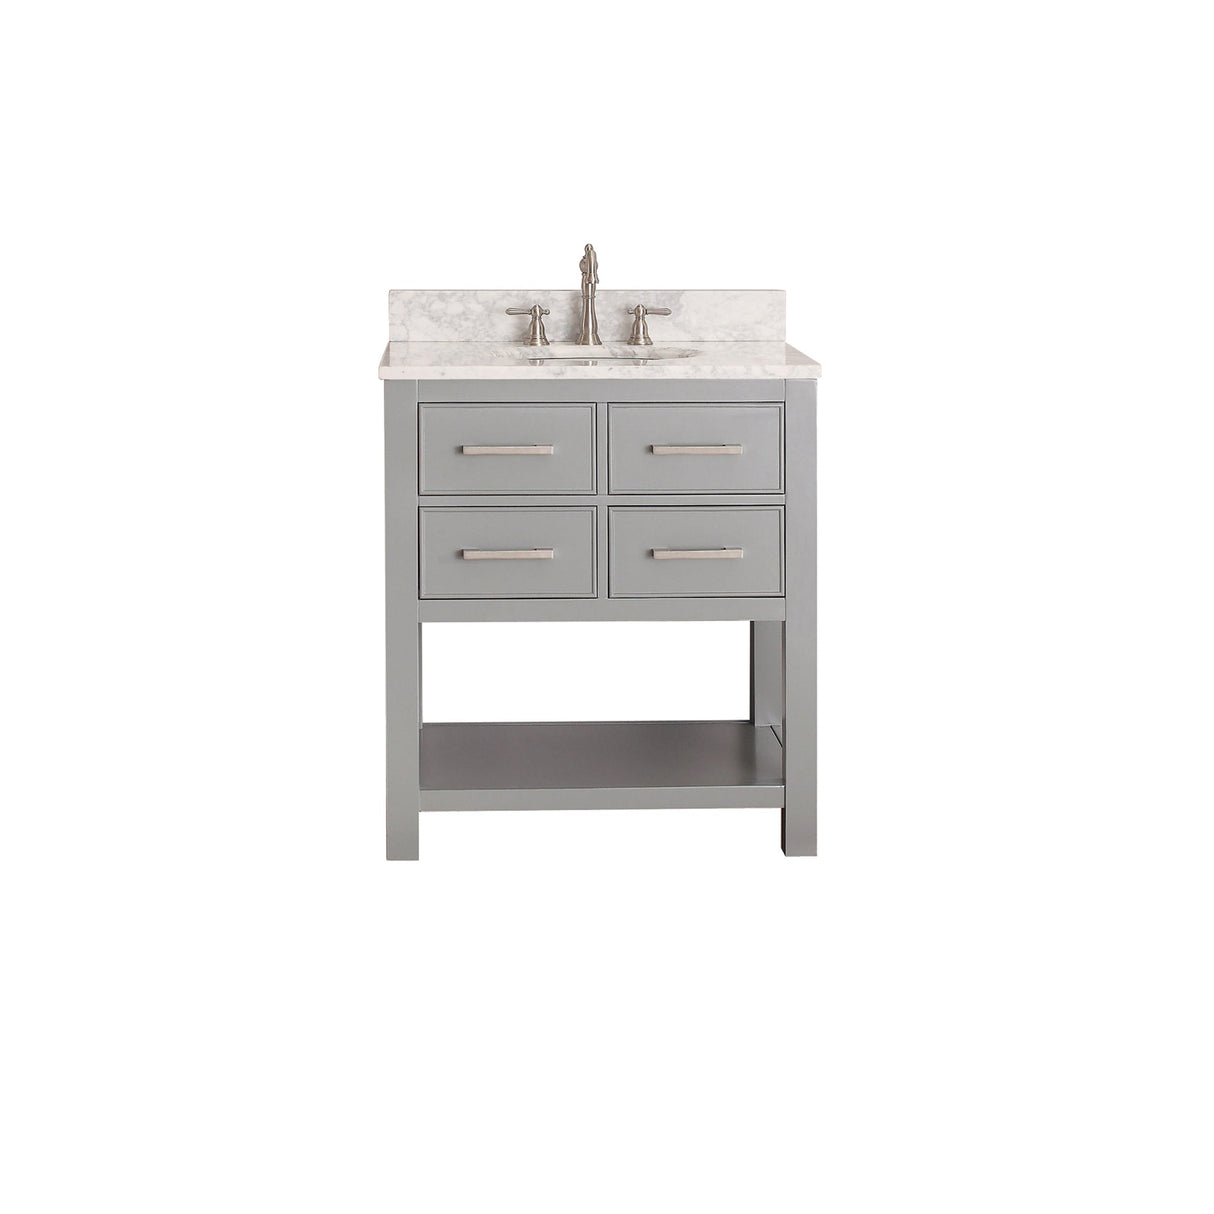 Avanity Brooks 31 in. Vanity in Chilled Gray finish with Carrara White Marble Top